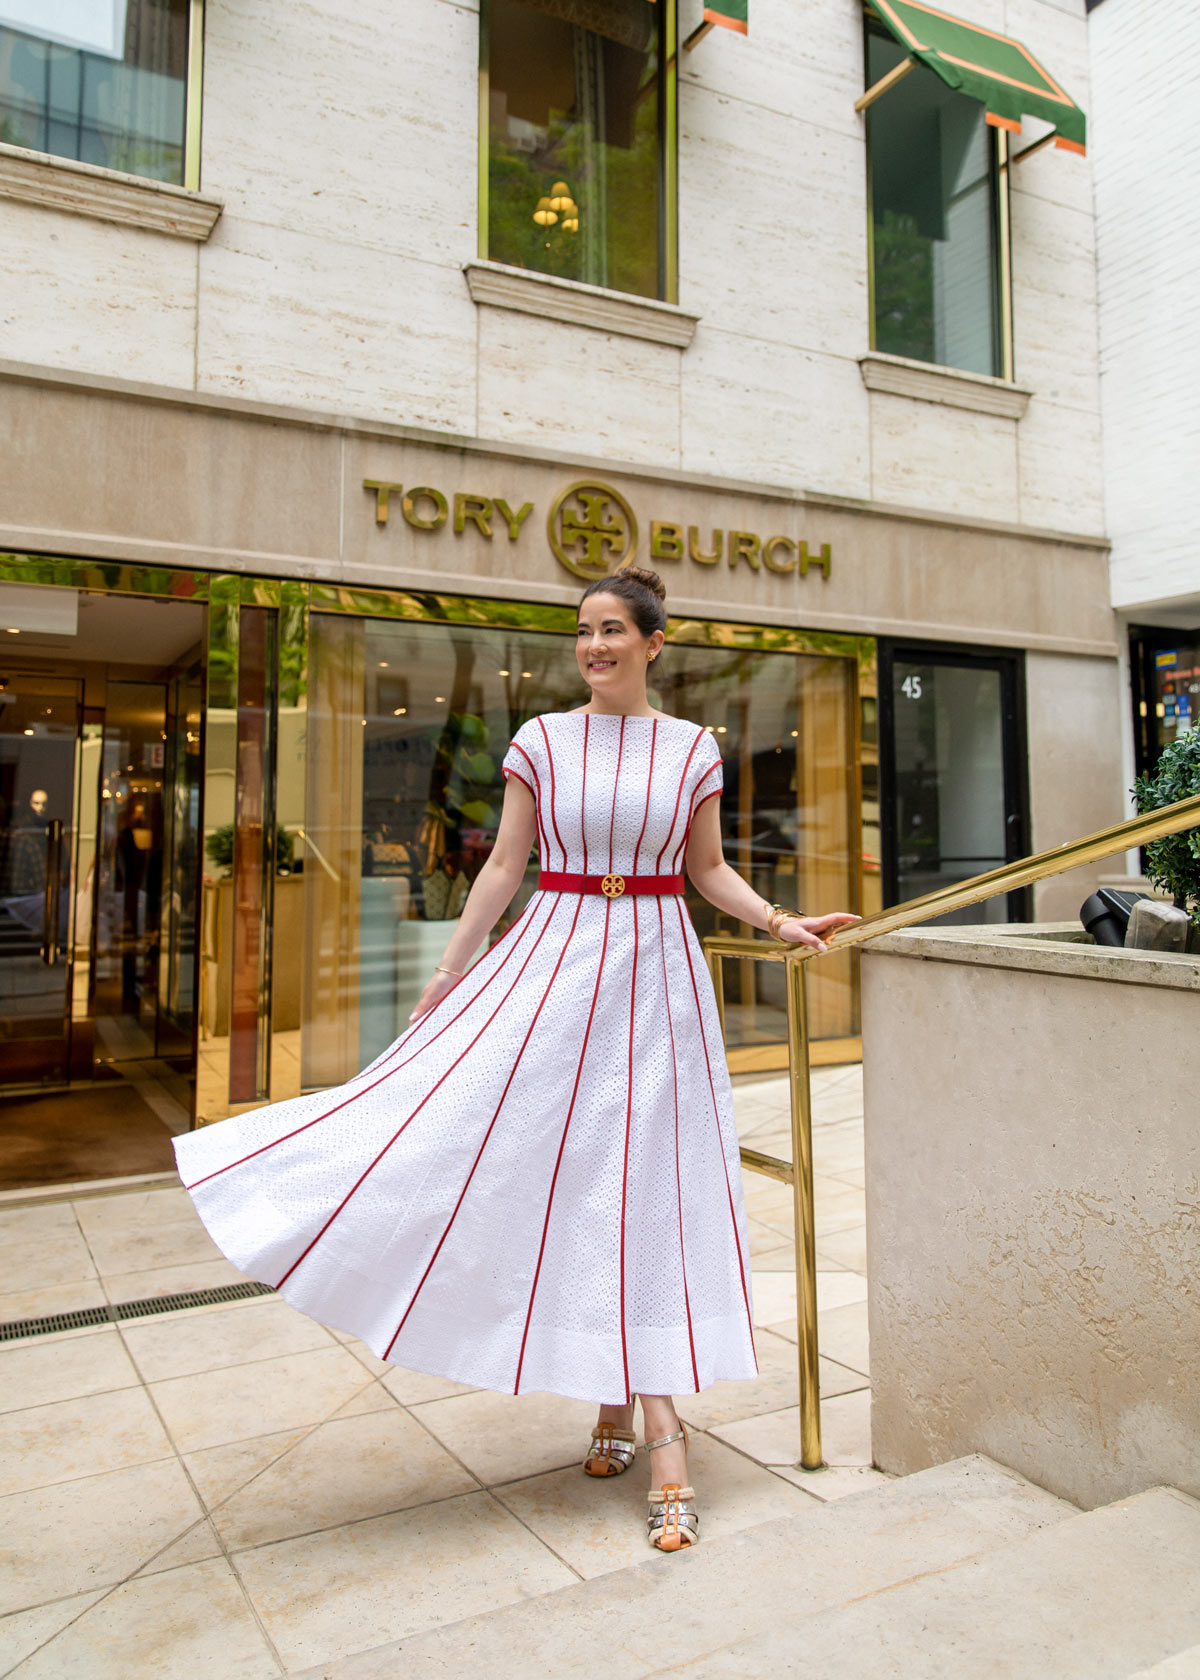 Tory Burch Private Sale Spring 2022: Best Bags to Buy